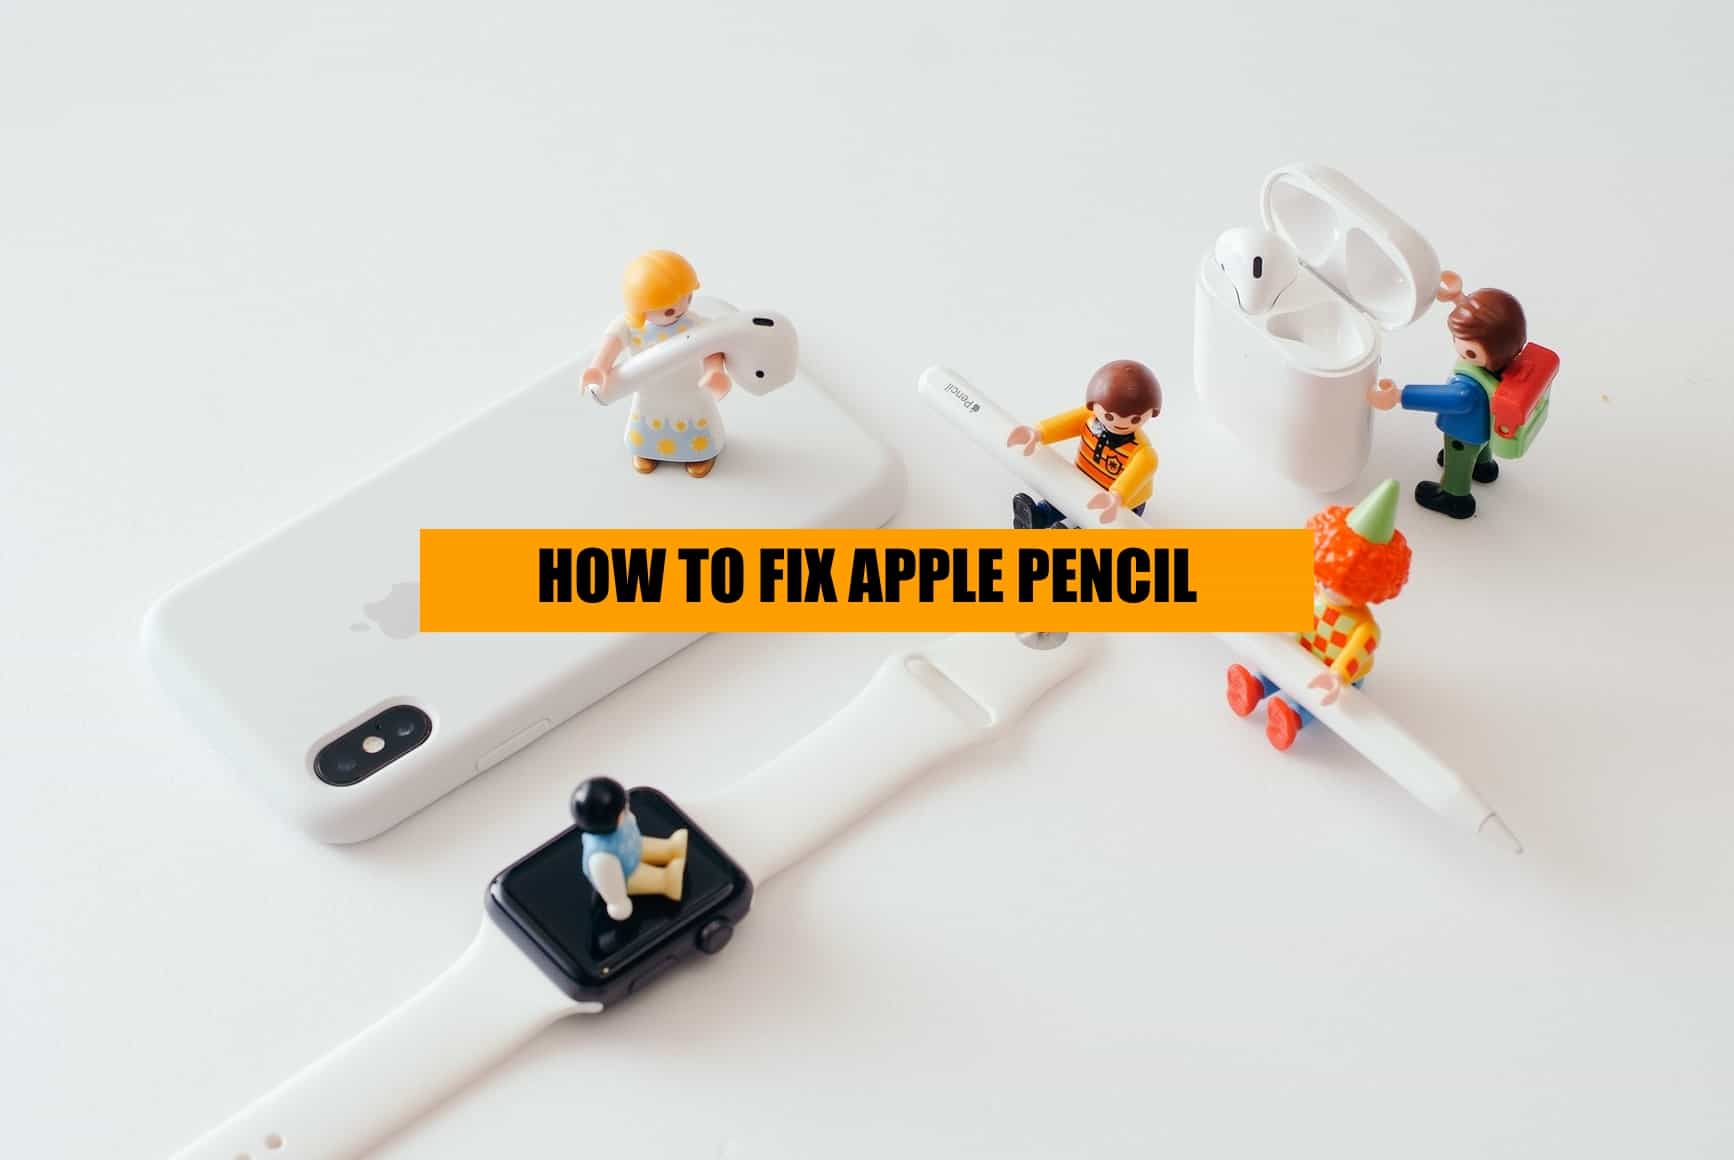 How to fix apple pencil beginner friendly guide